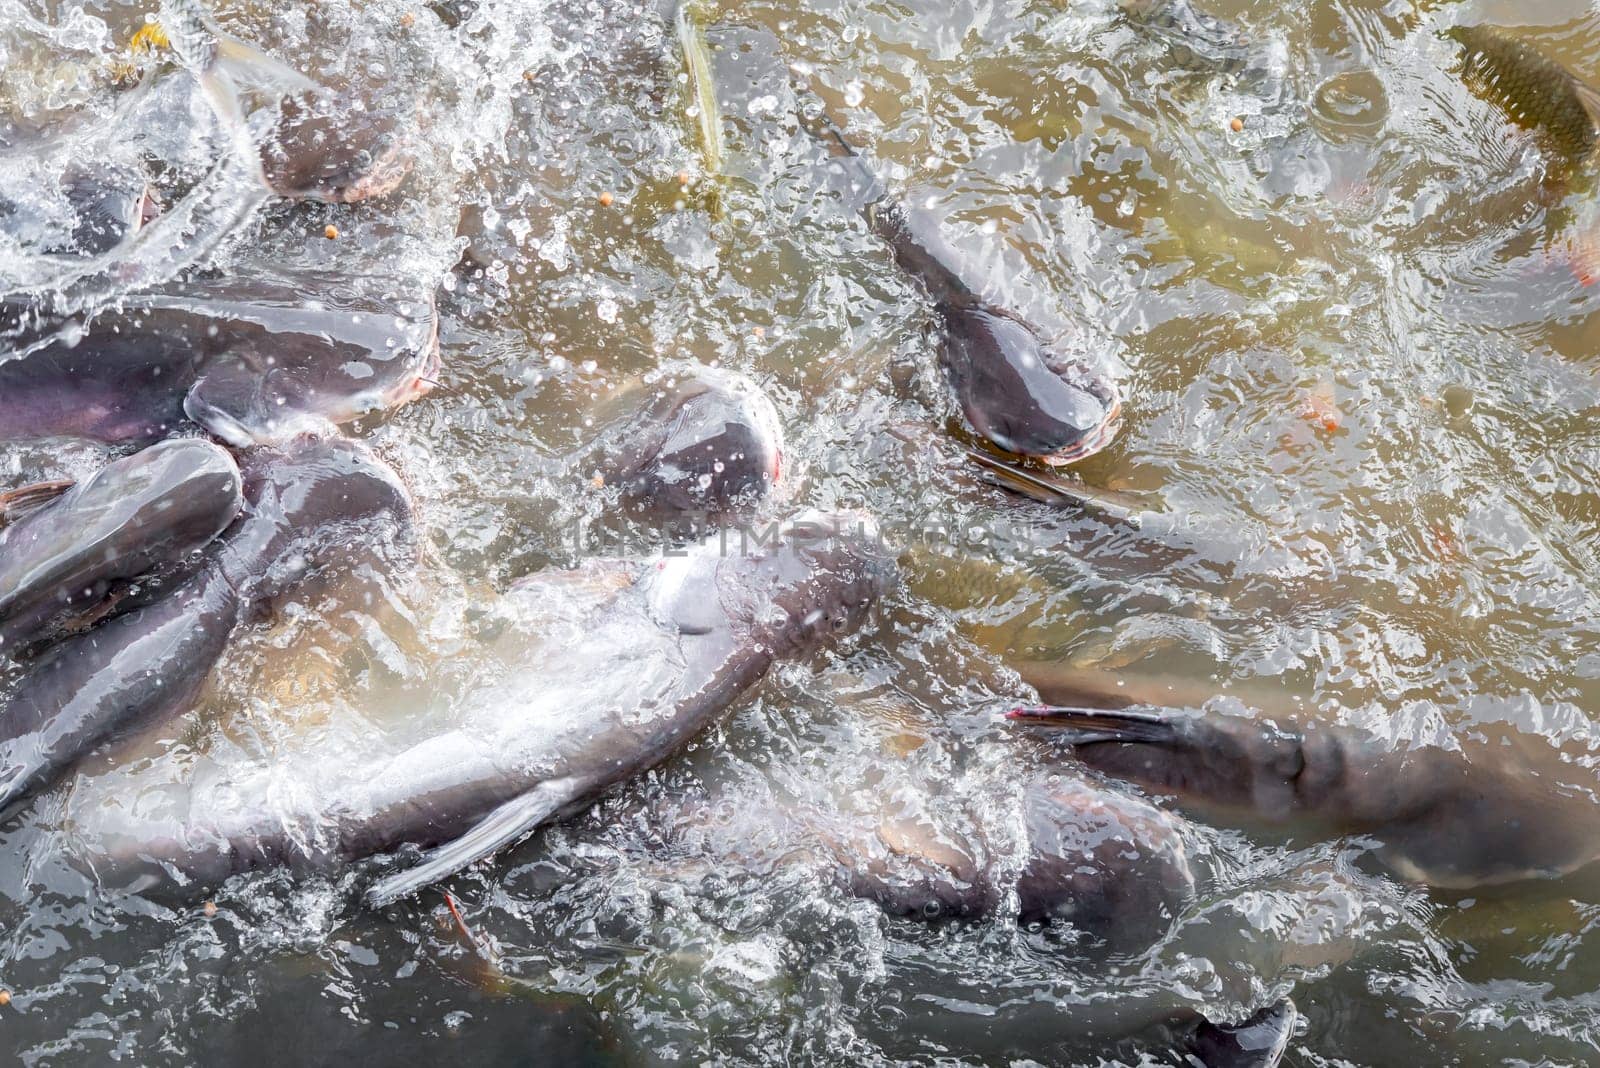 Crowd of freshwater fish scramble food in river by NongEngEng